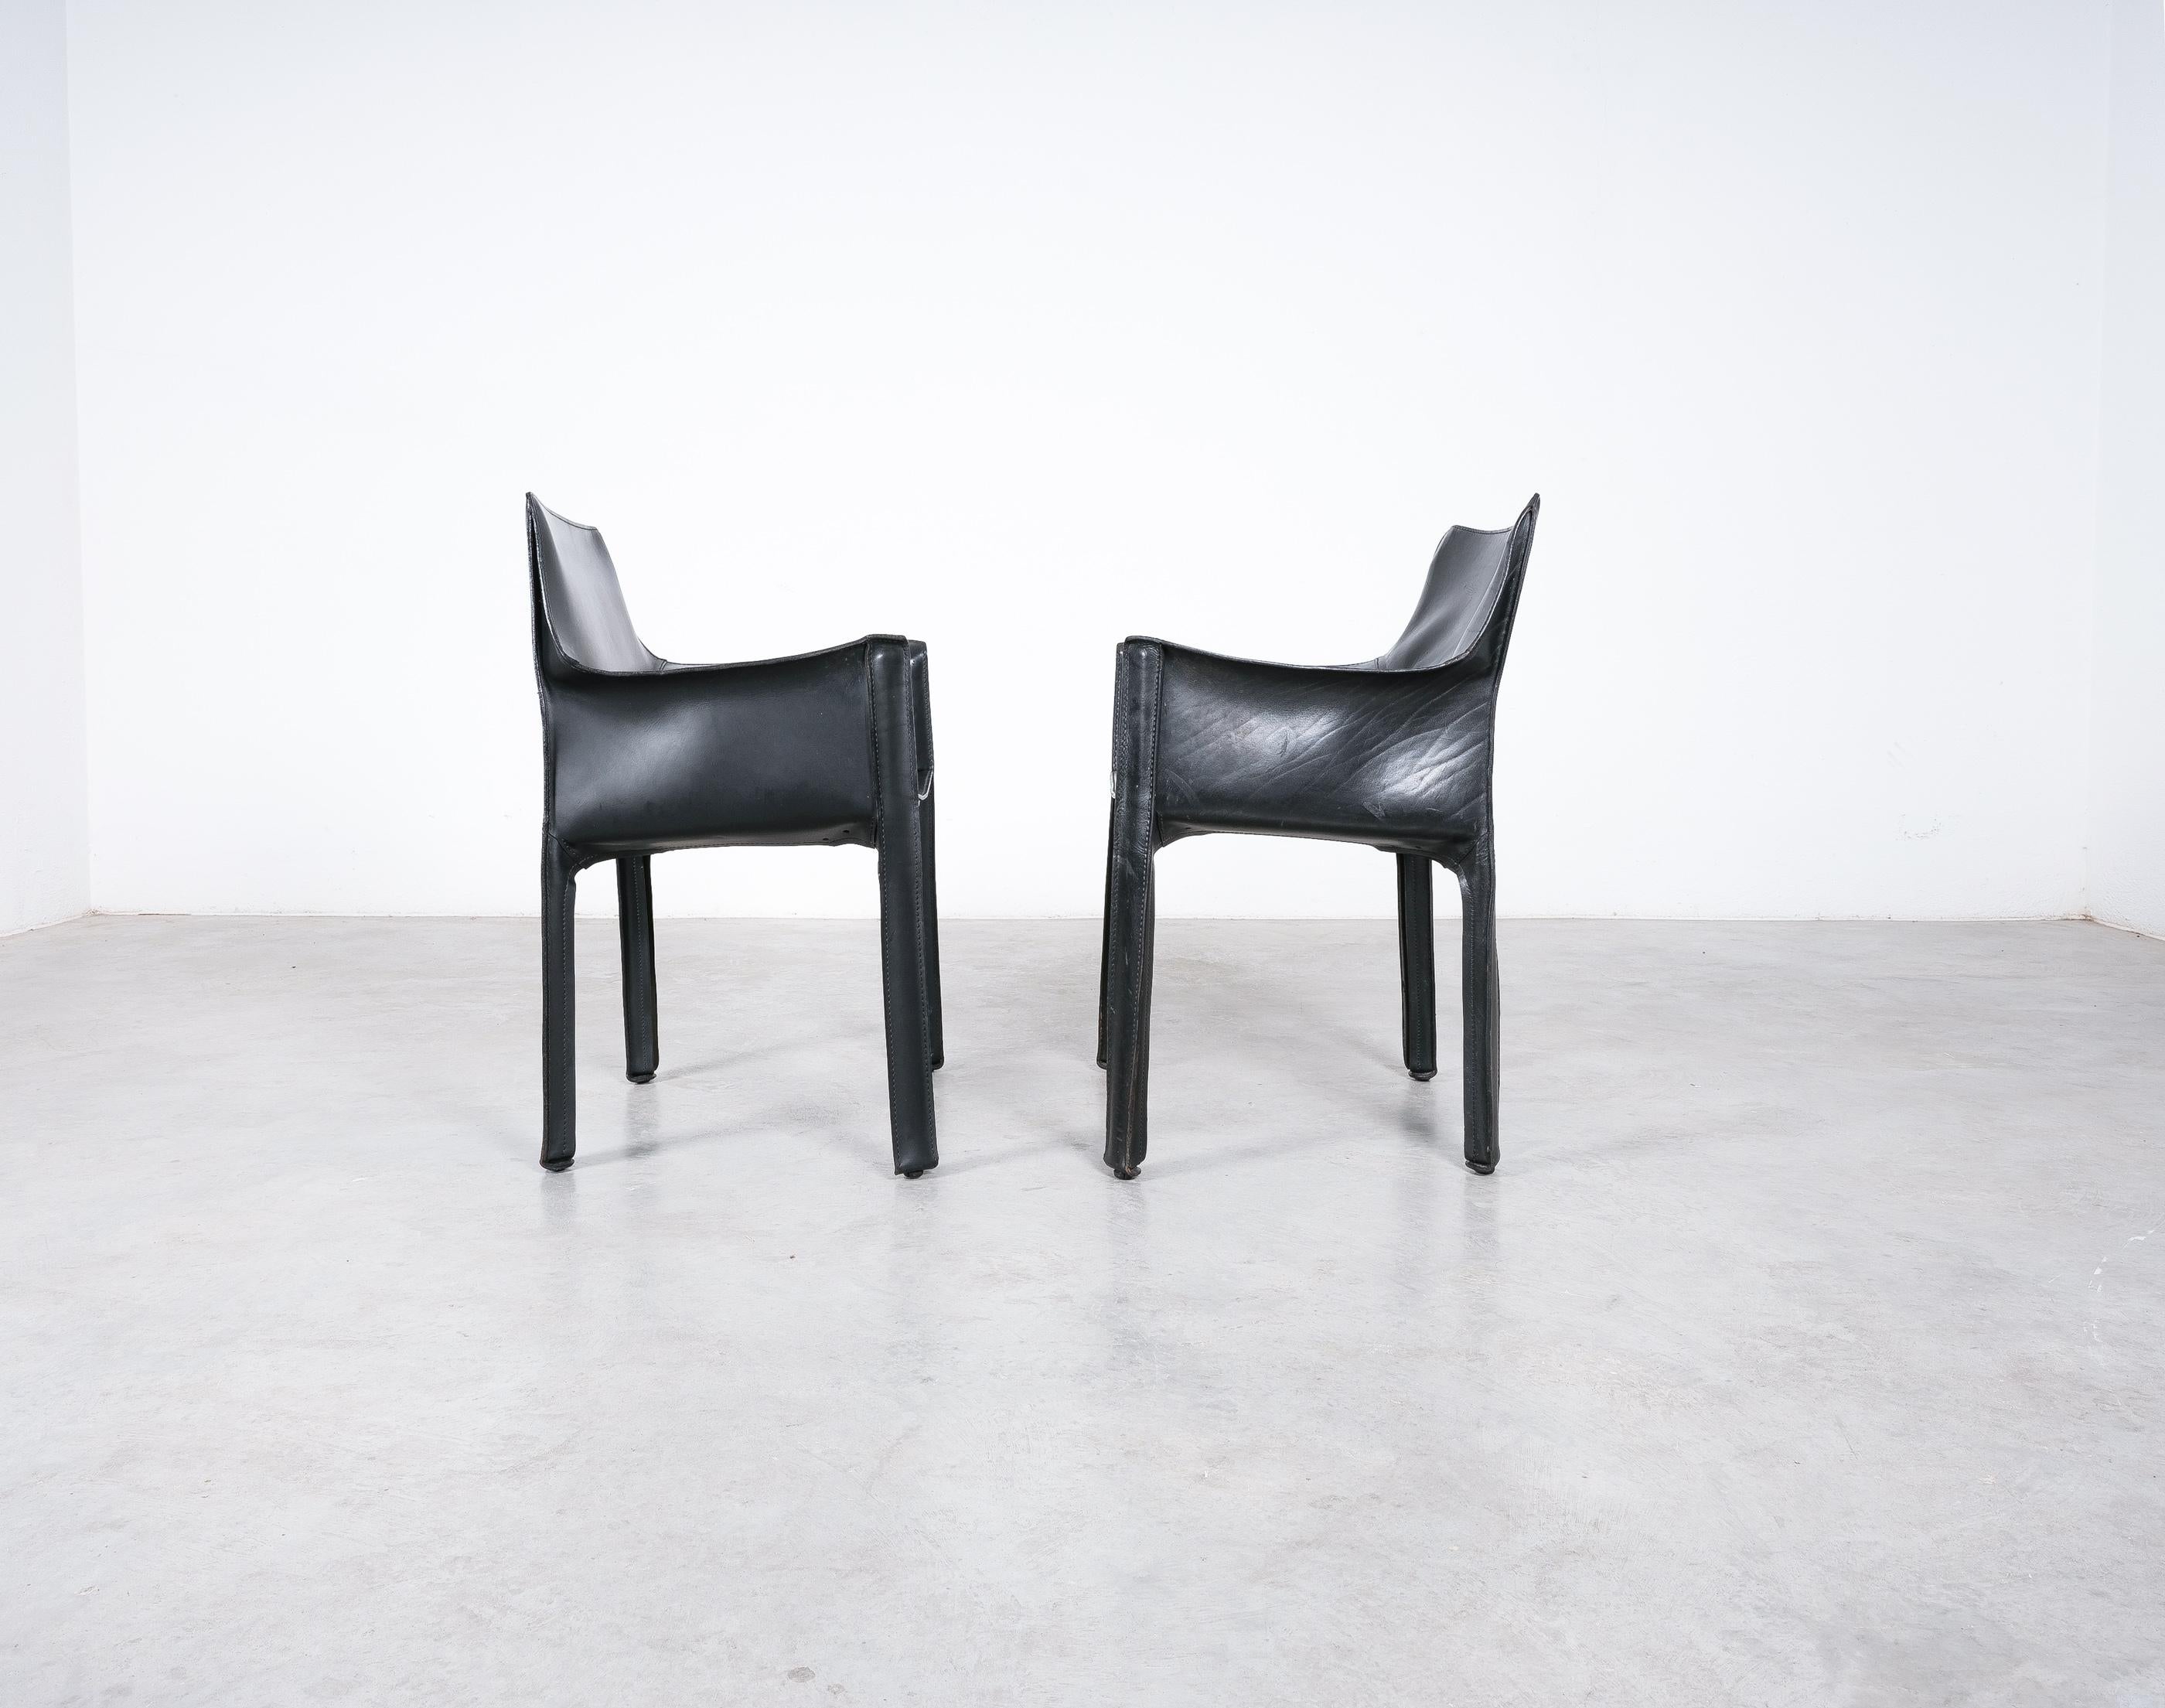 Post-Modern Mario Bellini Cassina Cab 413 (6 pieces available) Leather Dining Chairs, Italy